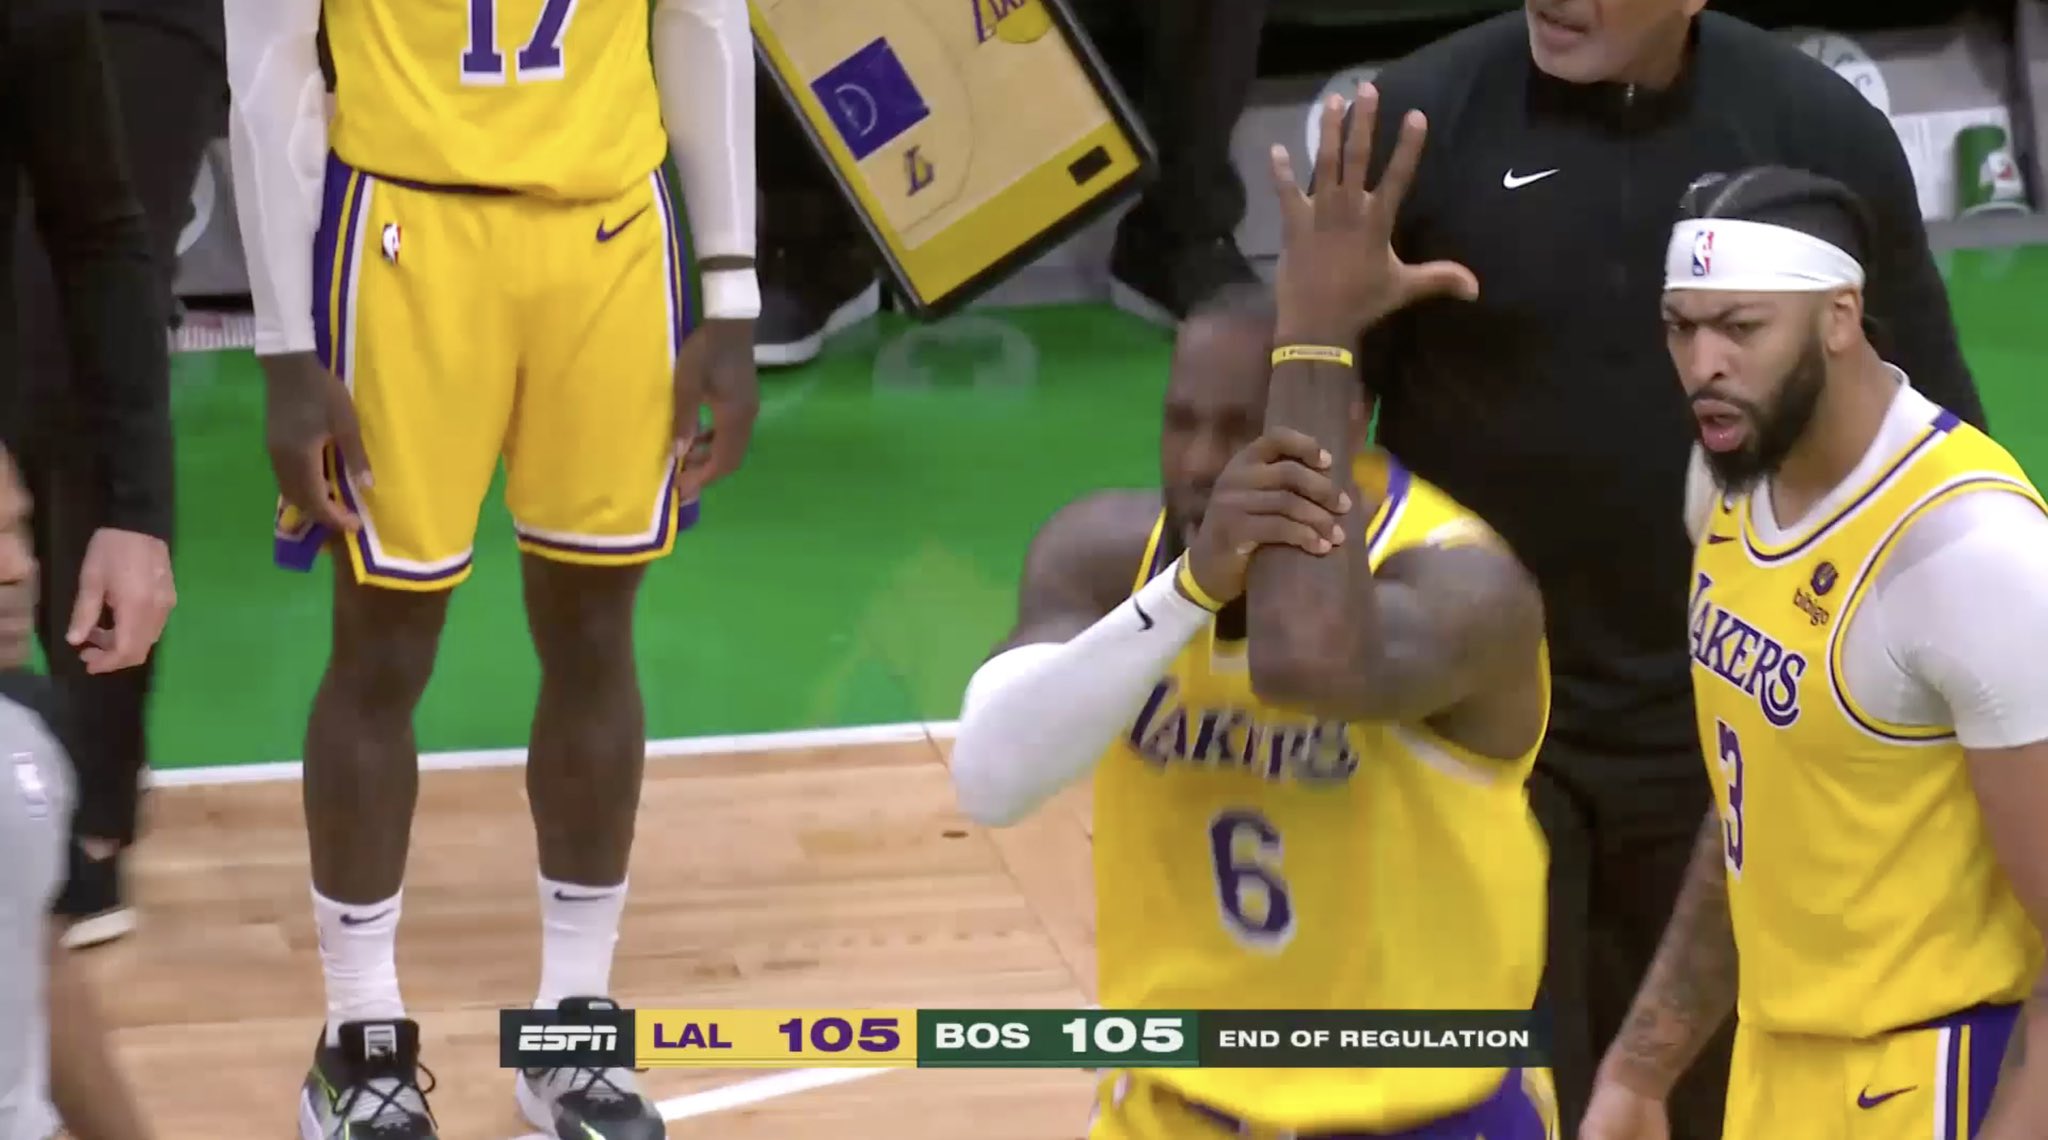 LeBron James was furious after he did not get a clear foul